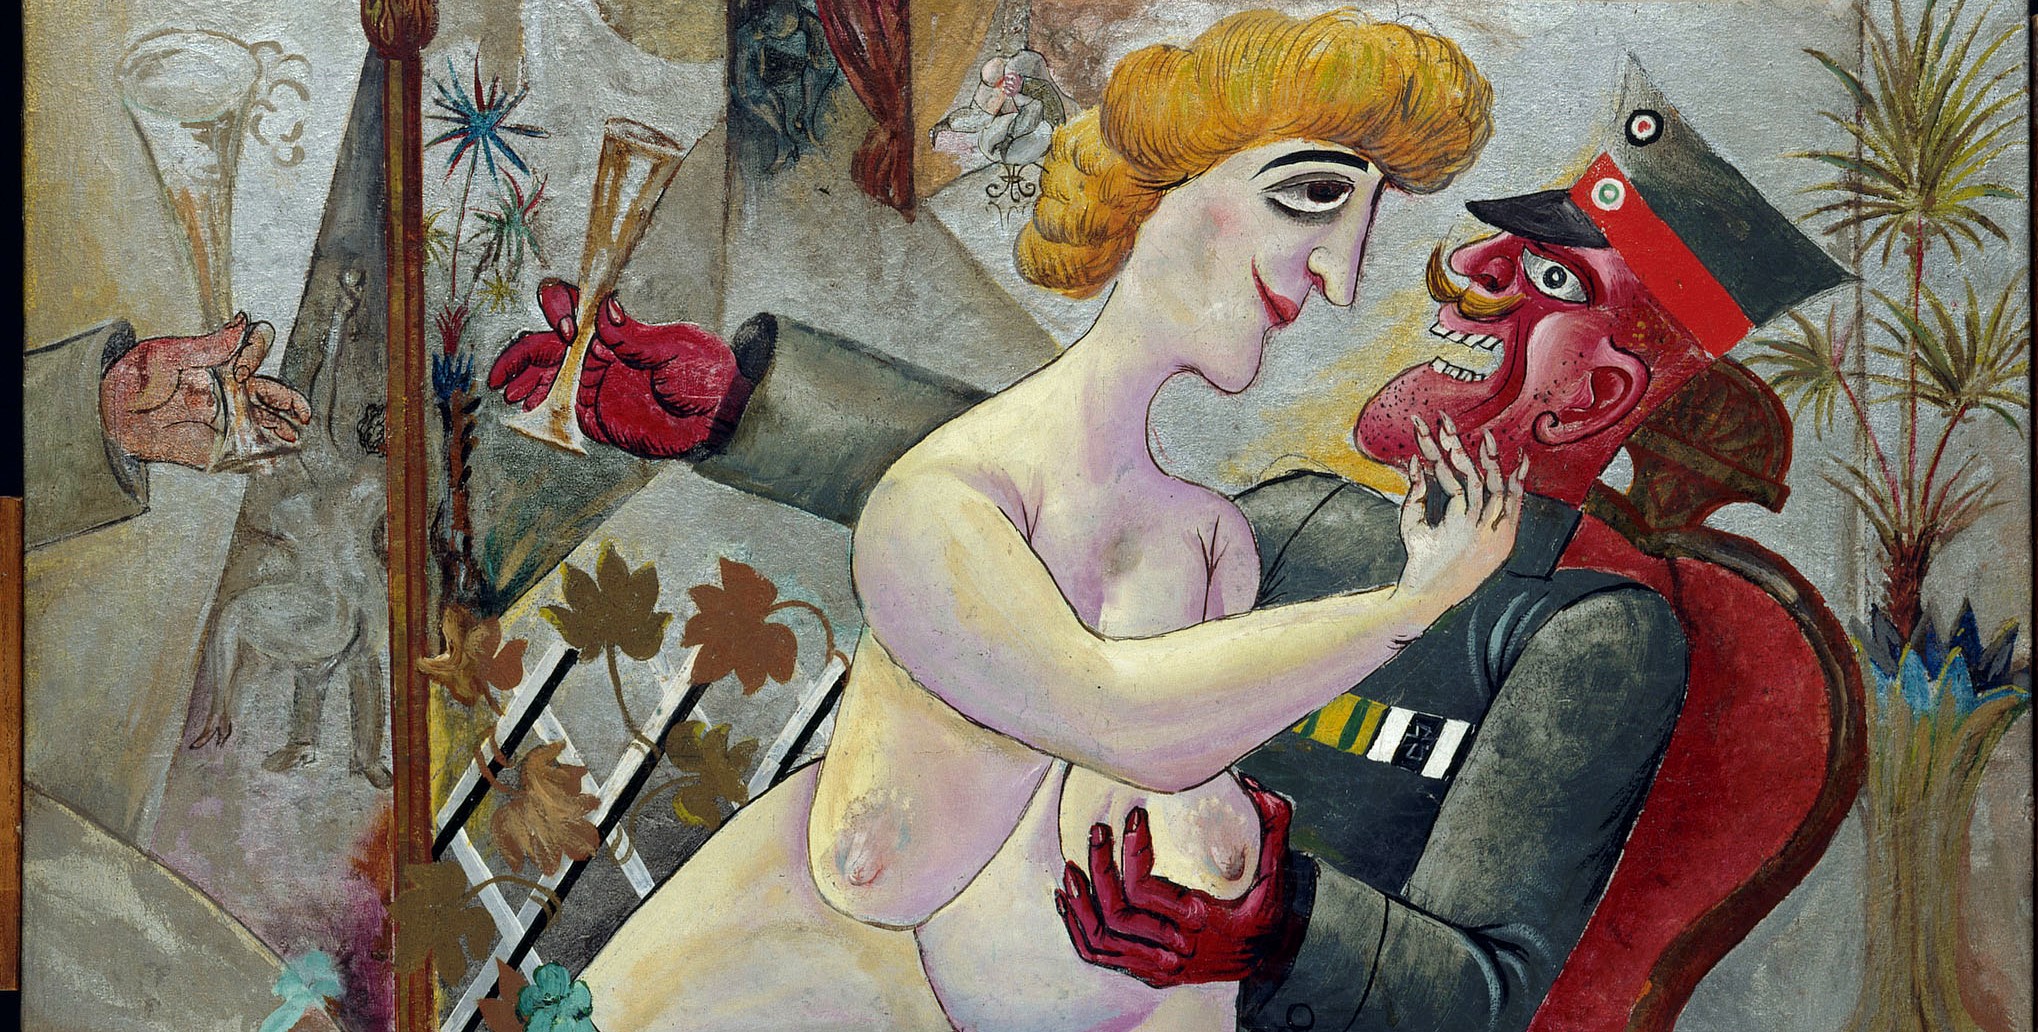 Otto Dix's ‘Memories of the mirrors room in Brussels’ 